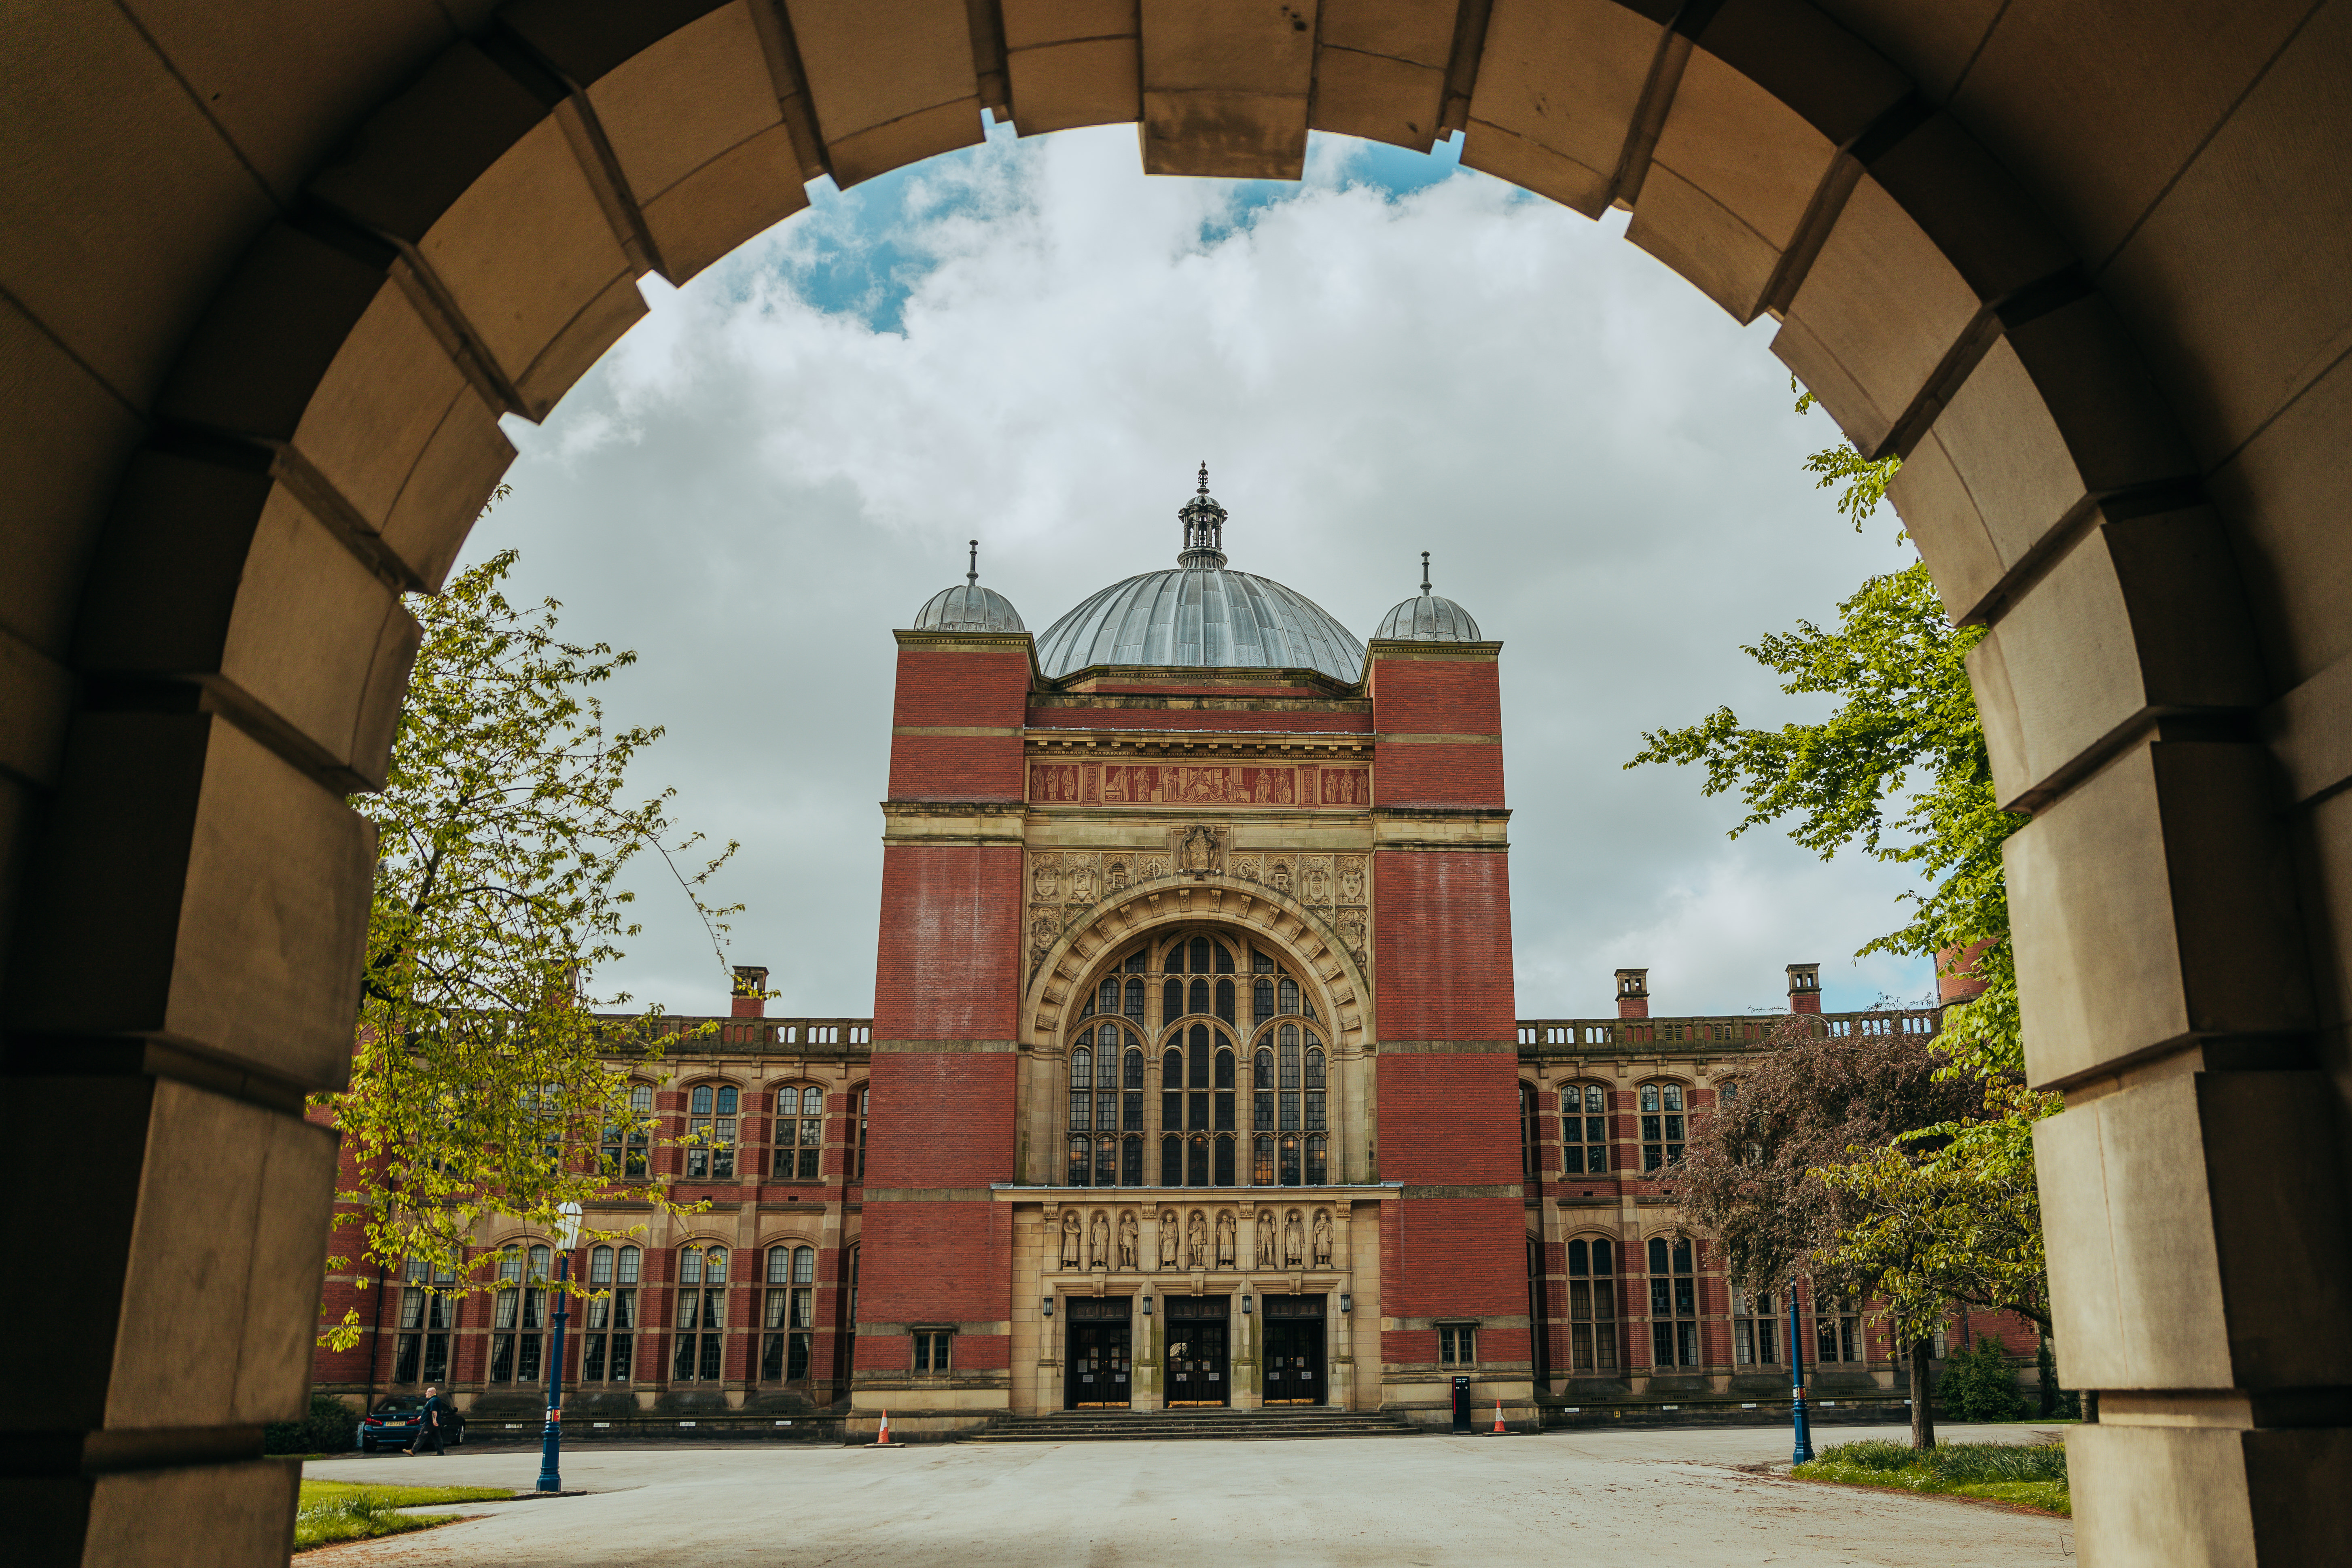 The main entrance to the Aston Webb building viewed through the arch of Old Joe